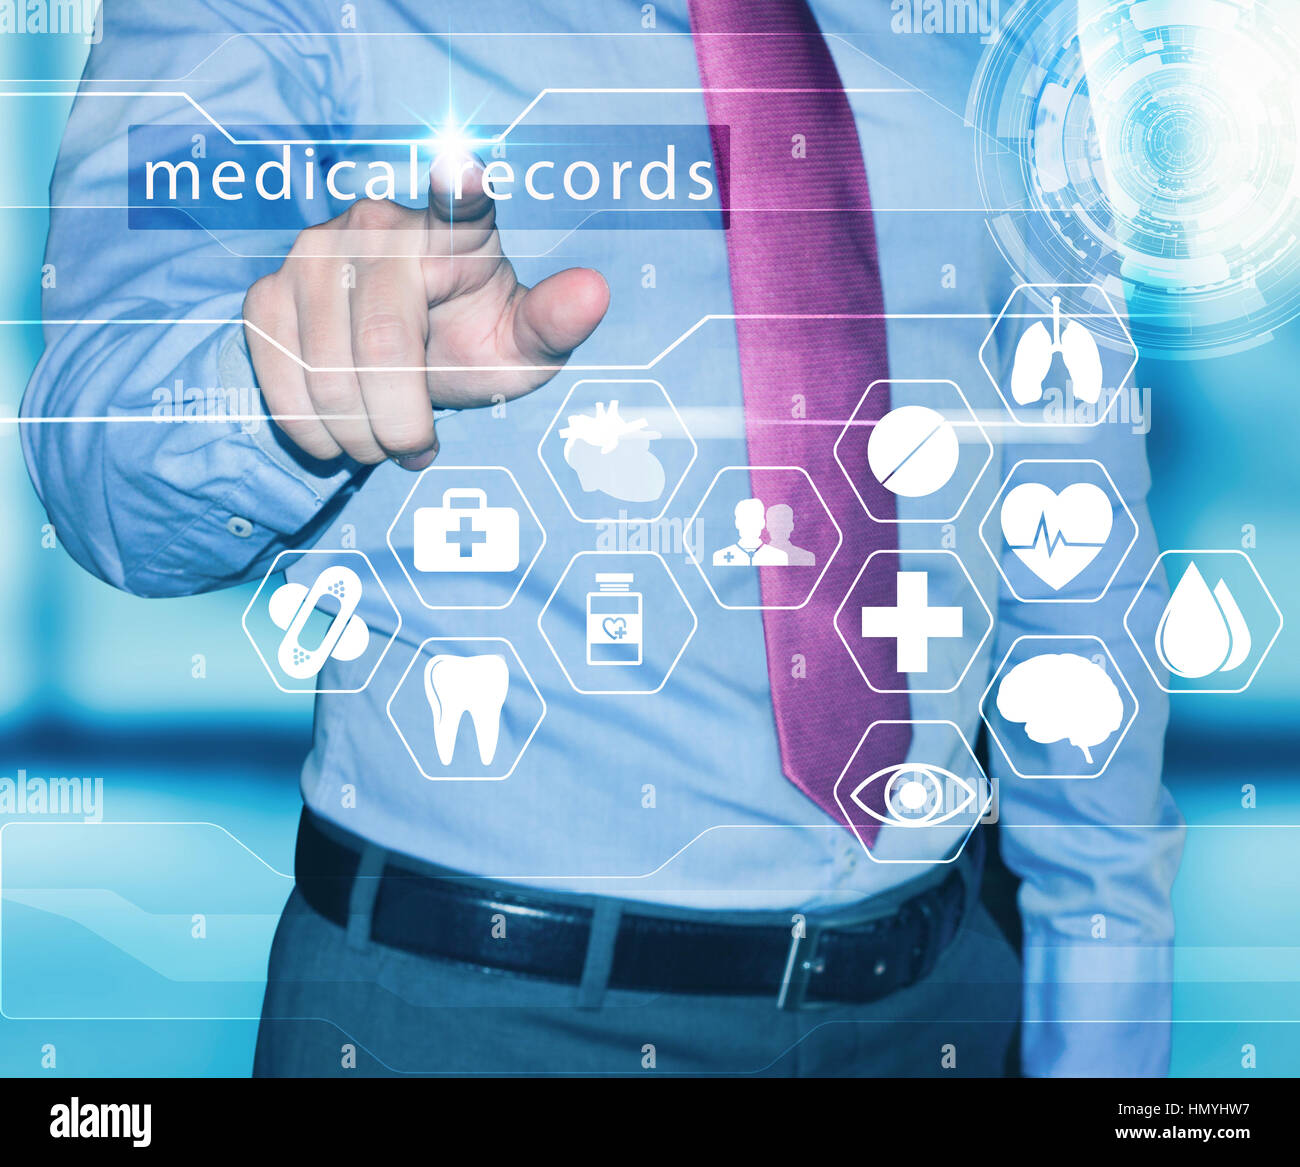 man working with medical records Stock Photo